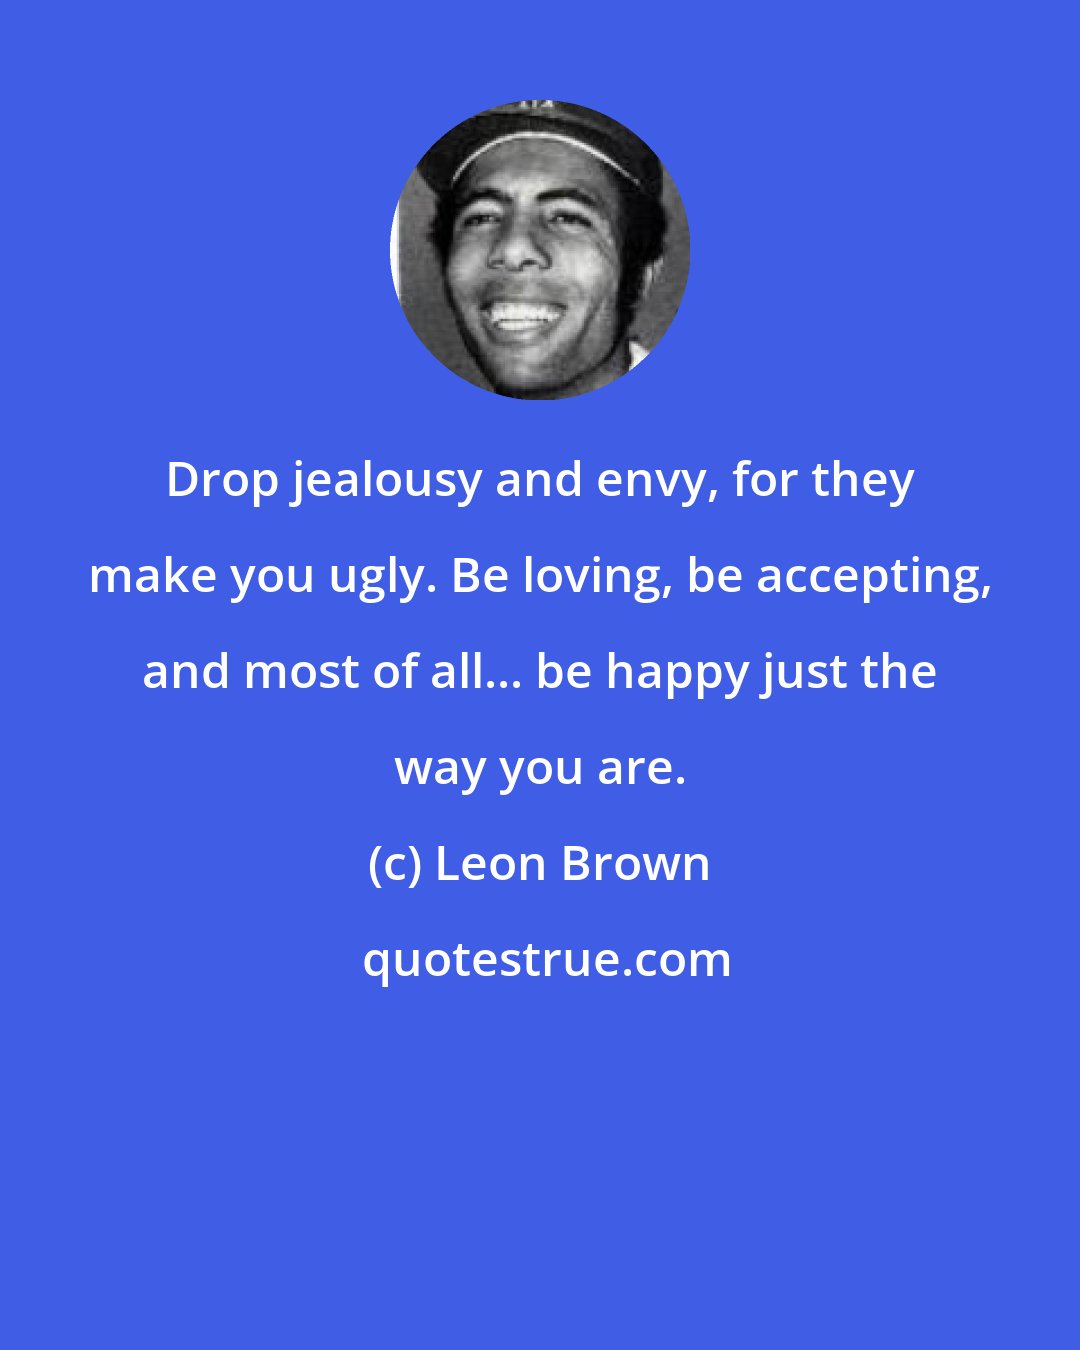 Leon Brown: Drop jealousy and envy, for they make you ugly. Be loving, be accepting, and most of all... be happy just the way you are.